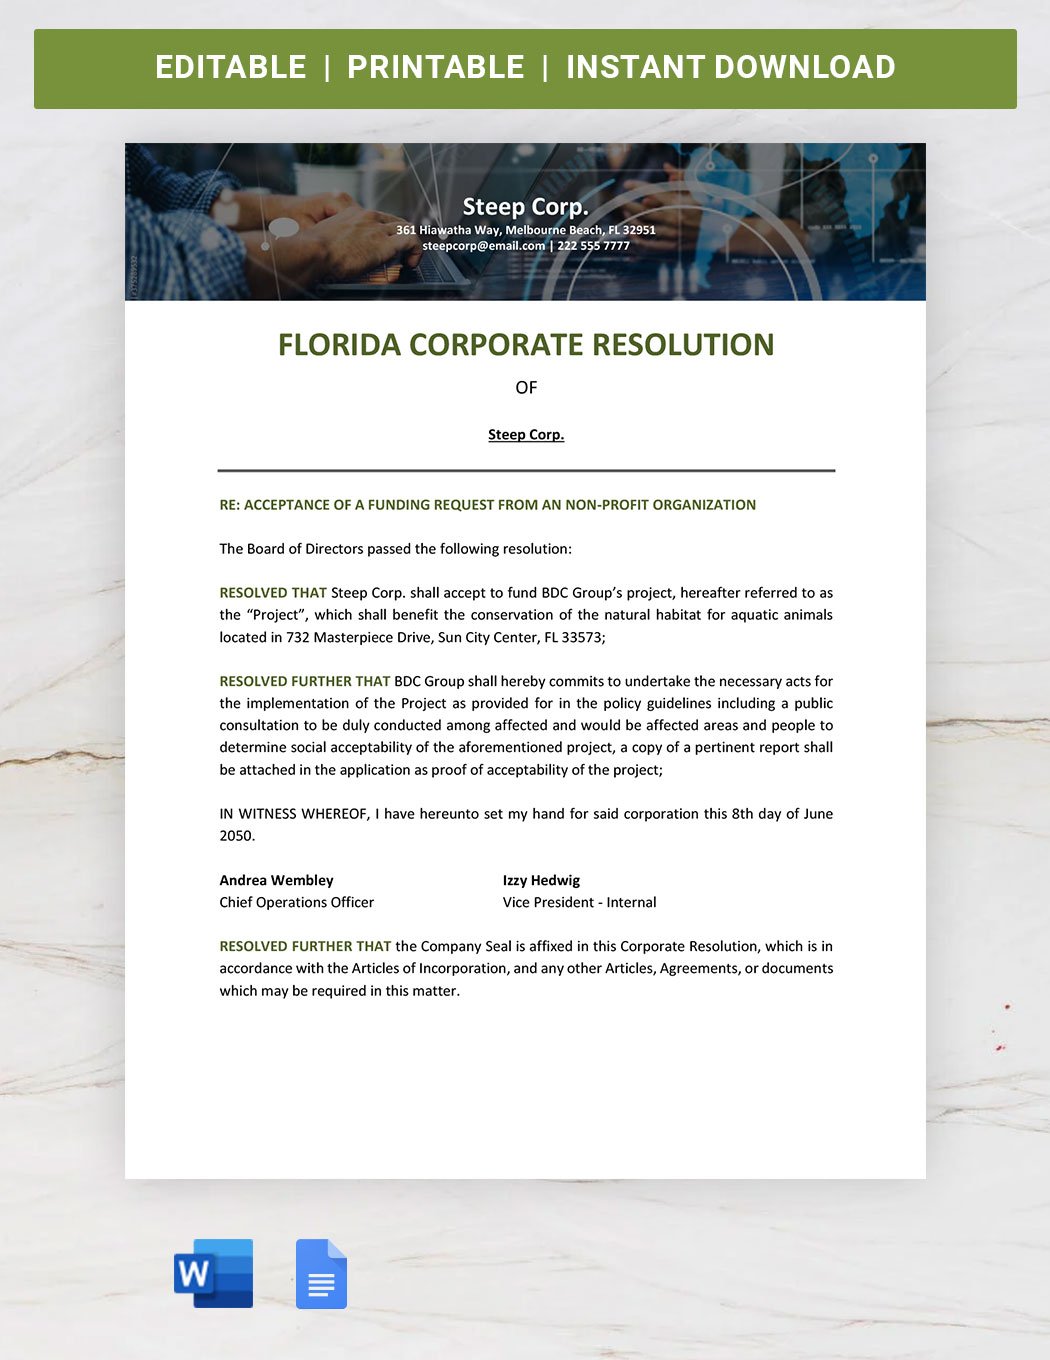 Florida Corporate Resolution Template in Word, Google Docs